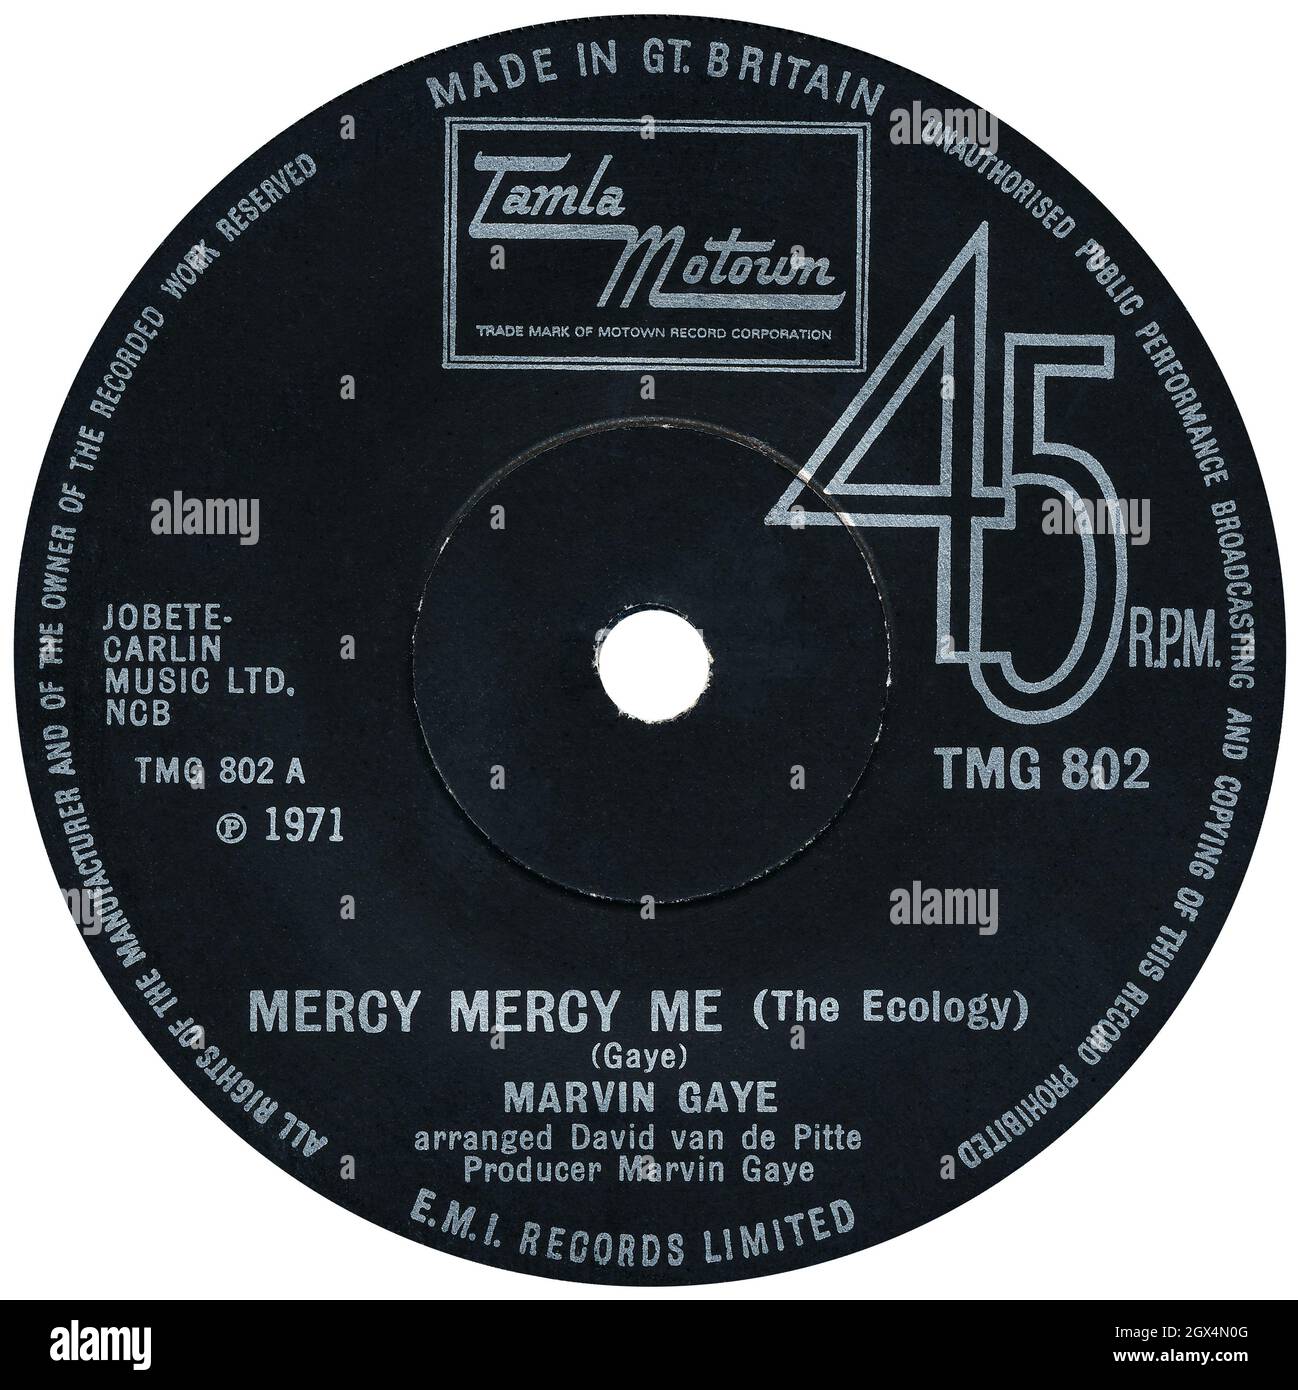 45 RPM 7" UK record label of Mercy Mercy Me (The Ecology) by Marvin Gaye.  Written by Marvin Gaye, arranged by David Van Pitte and produced by Marvin  Gaye. Released in February